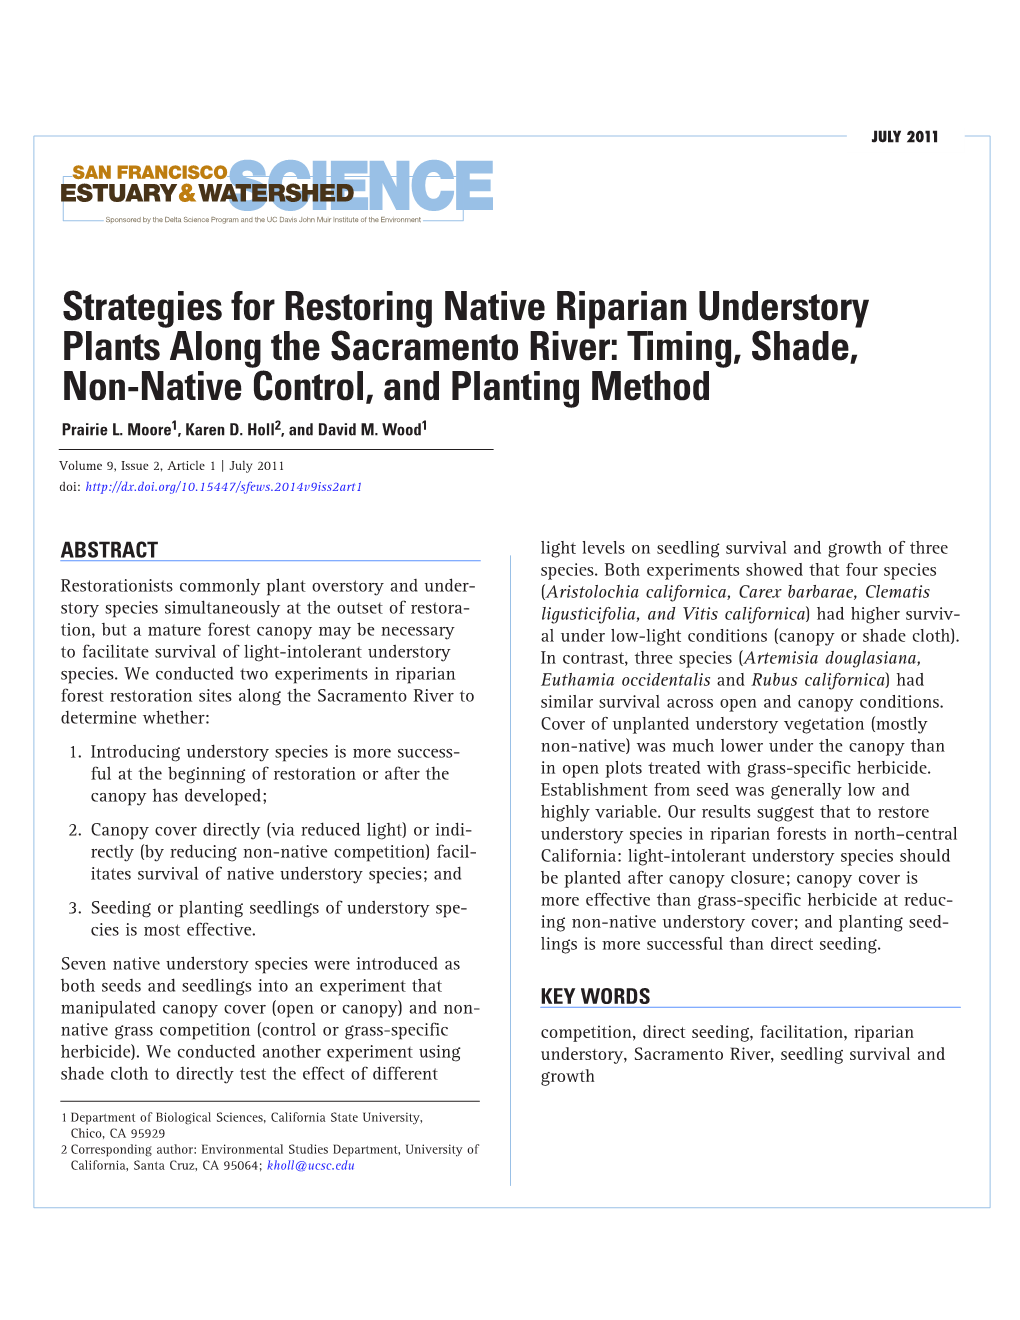 Strategies for Restoring Native Riparian Understory Plants Along the Sacramento River: Timing, Shade, Non-Native Control, and Planting Method Prairie L